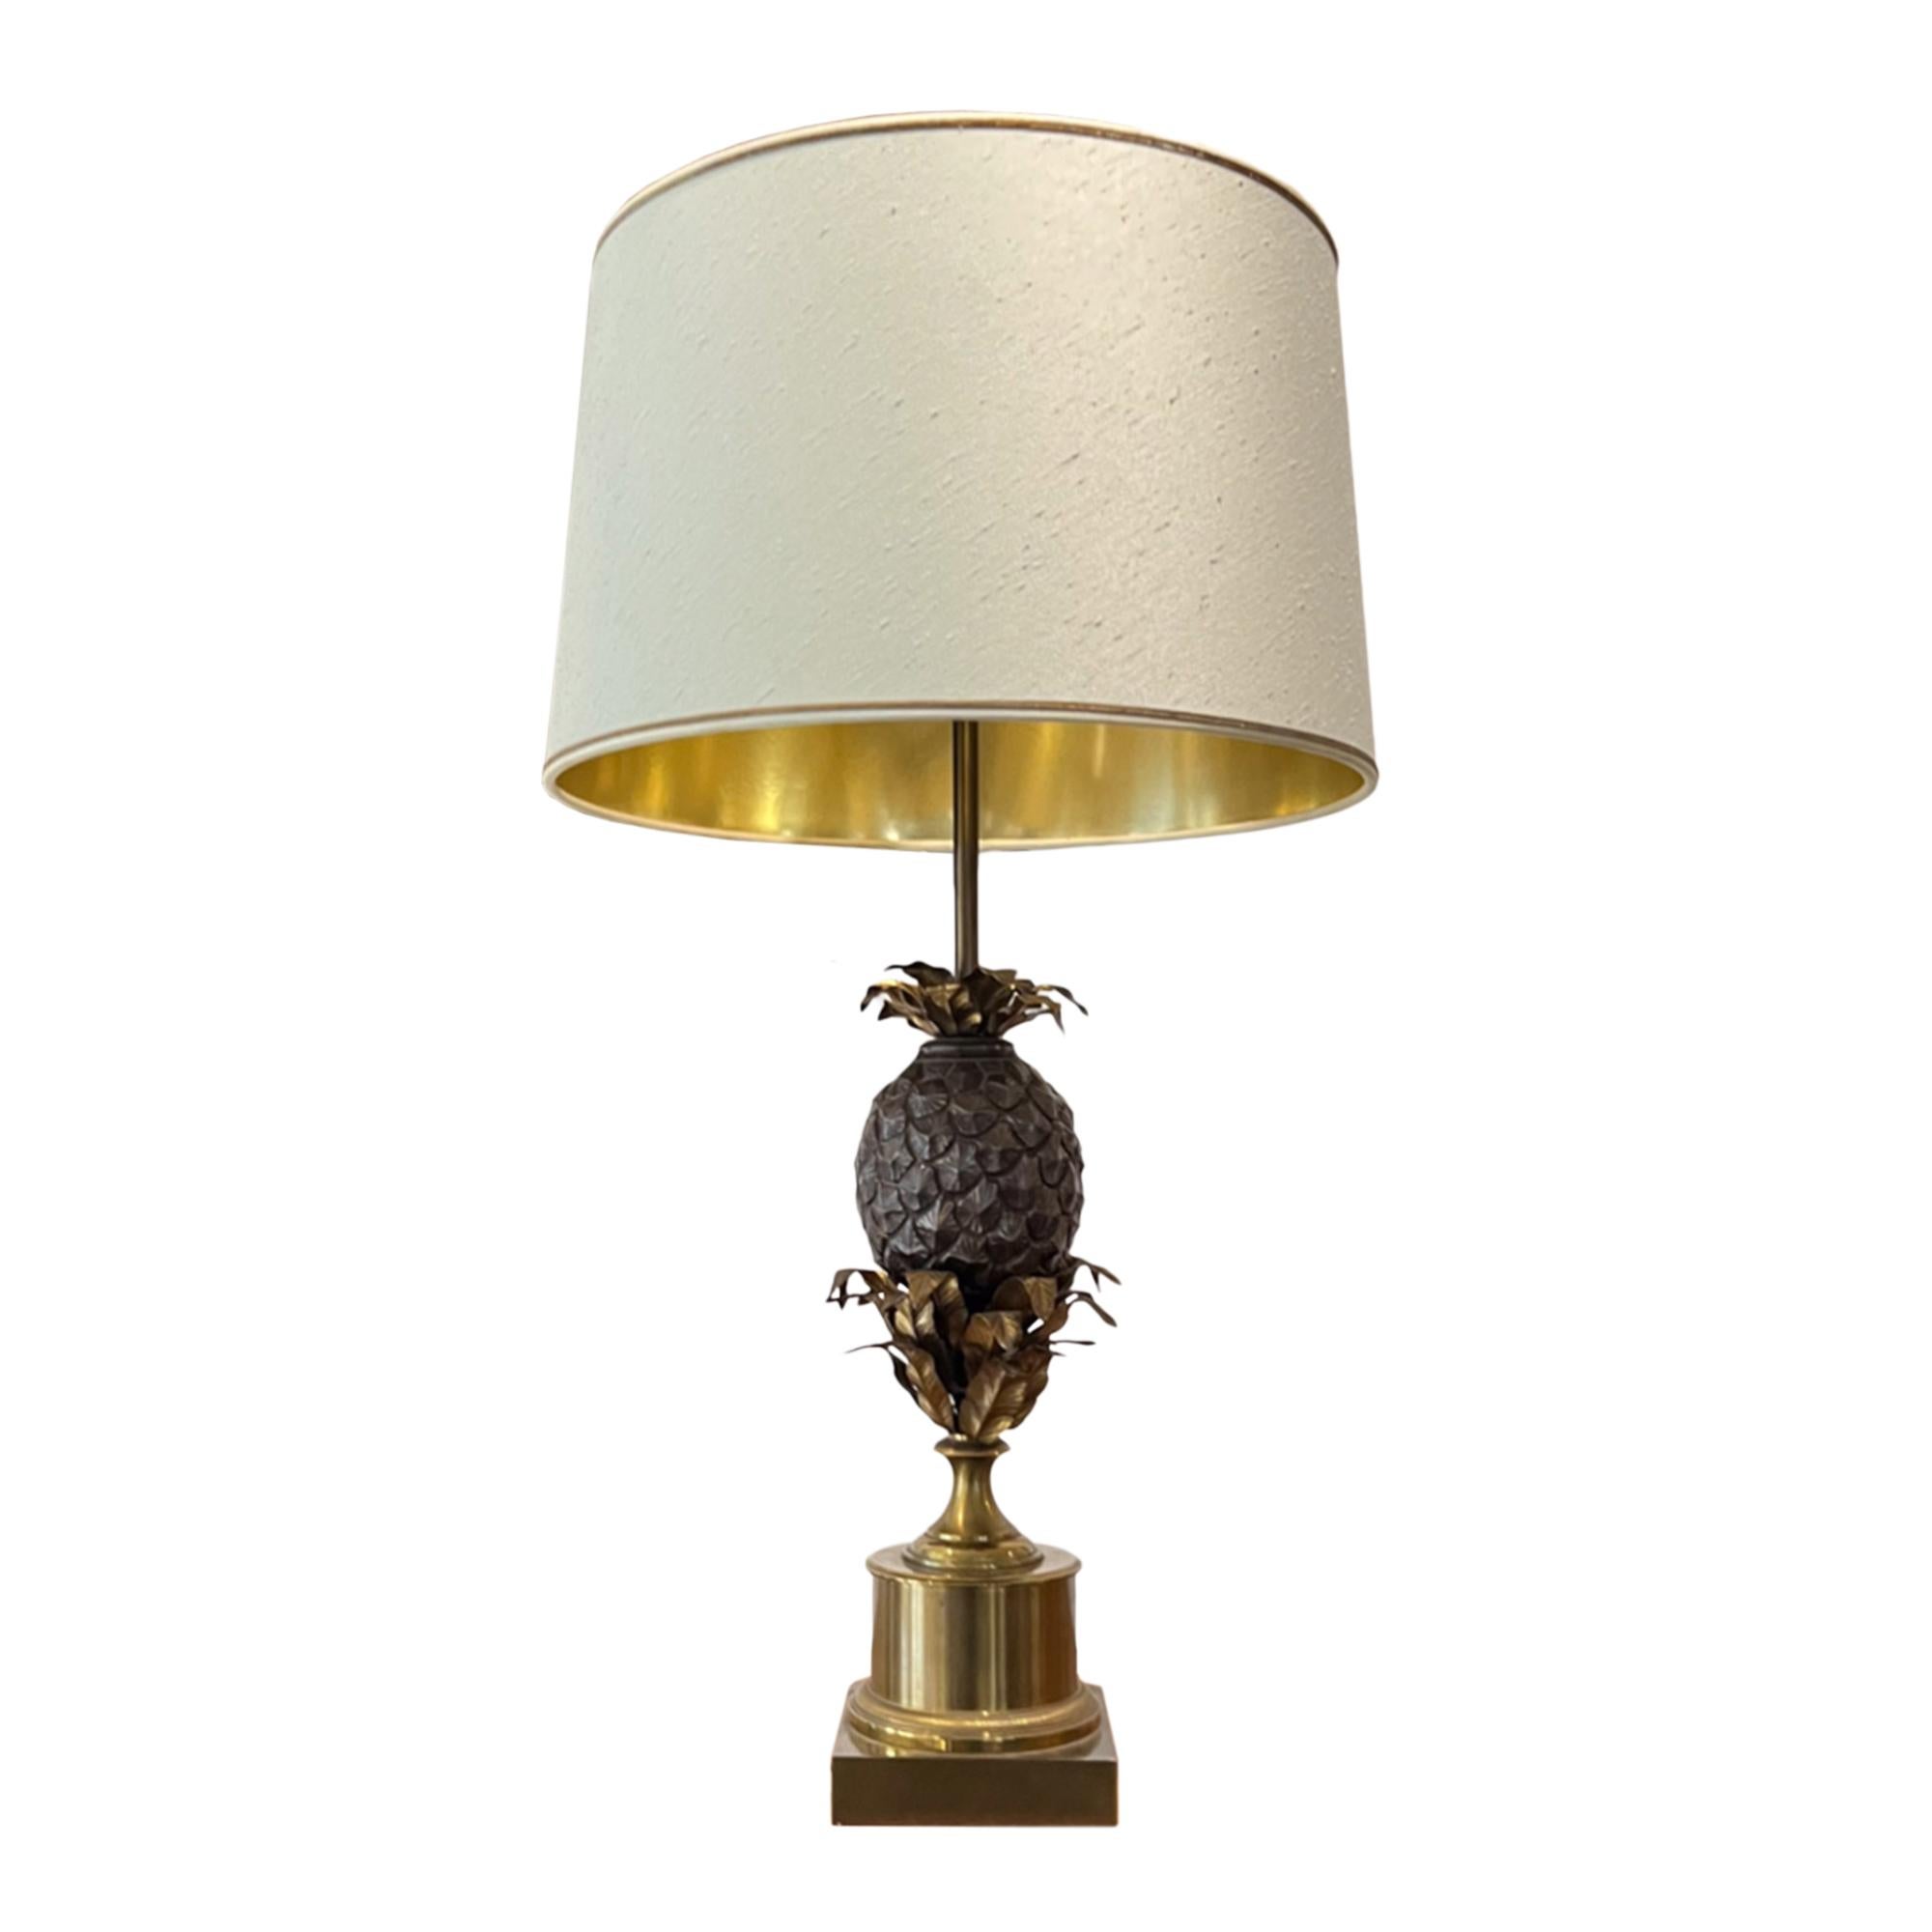 This pair of Maison Charles pineapple lamps are made from brass and metal with the original fabric shades. 

These lights decorated with the Charles' brothers iconic pineapples have 3 bulbs each and have been rewired with rope twisted flex. They